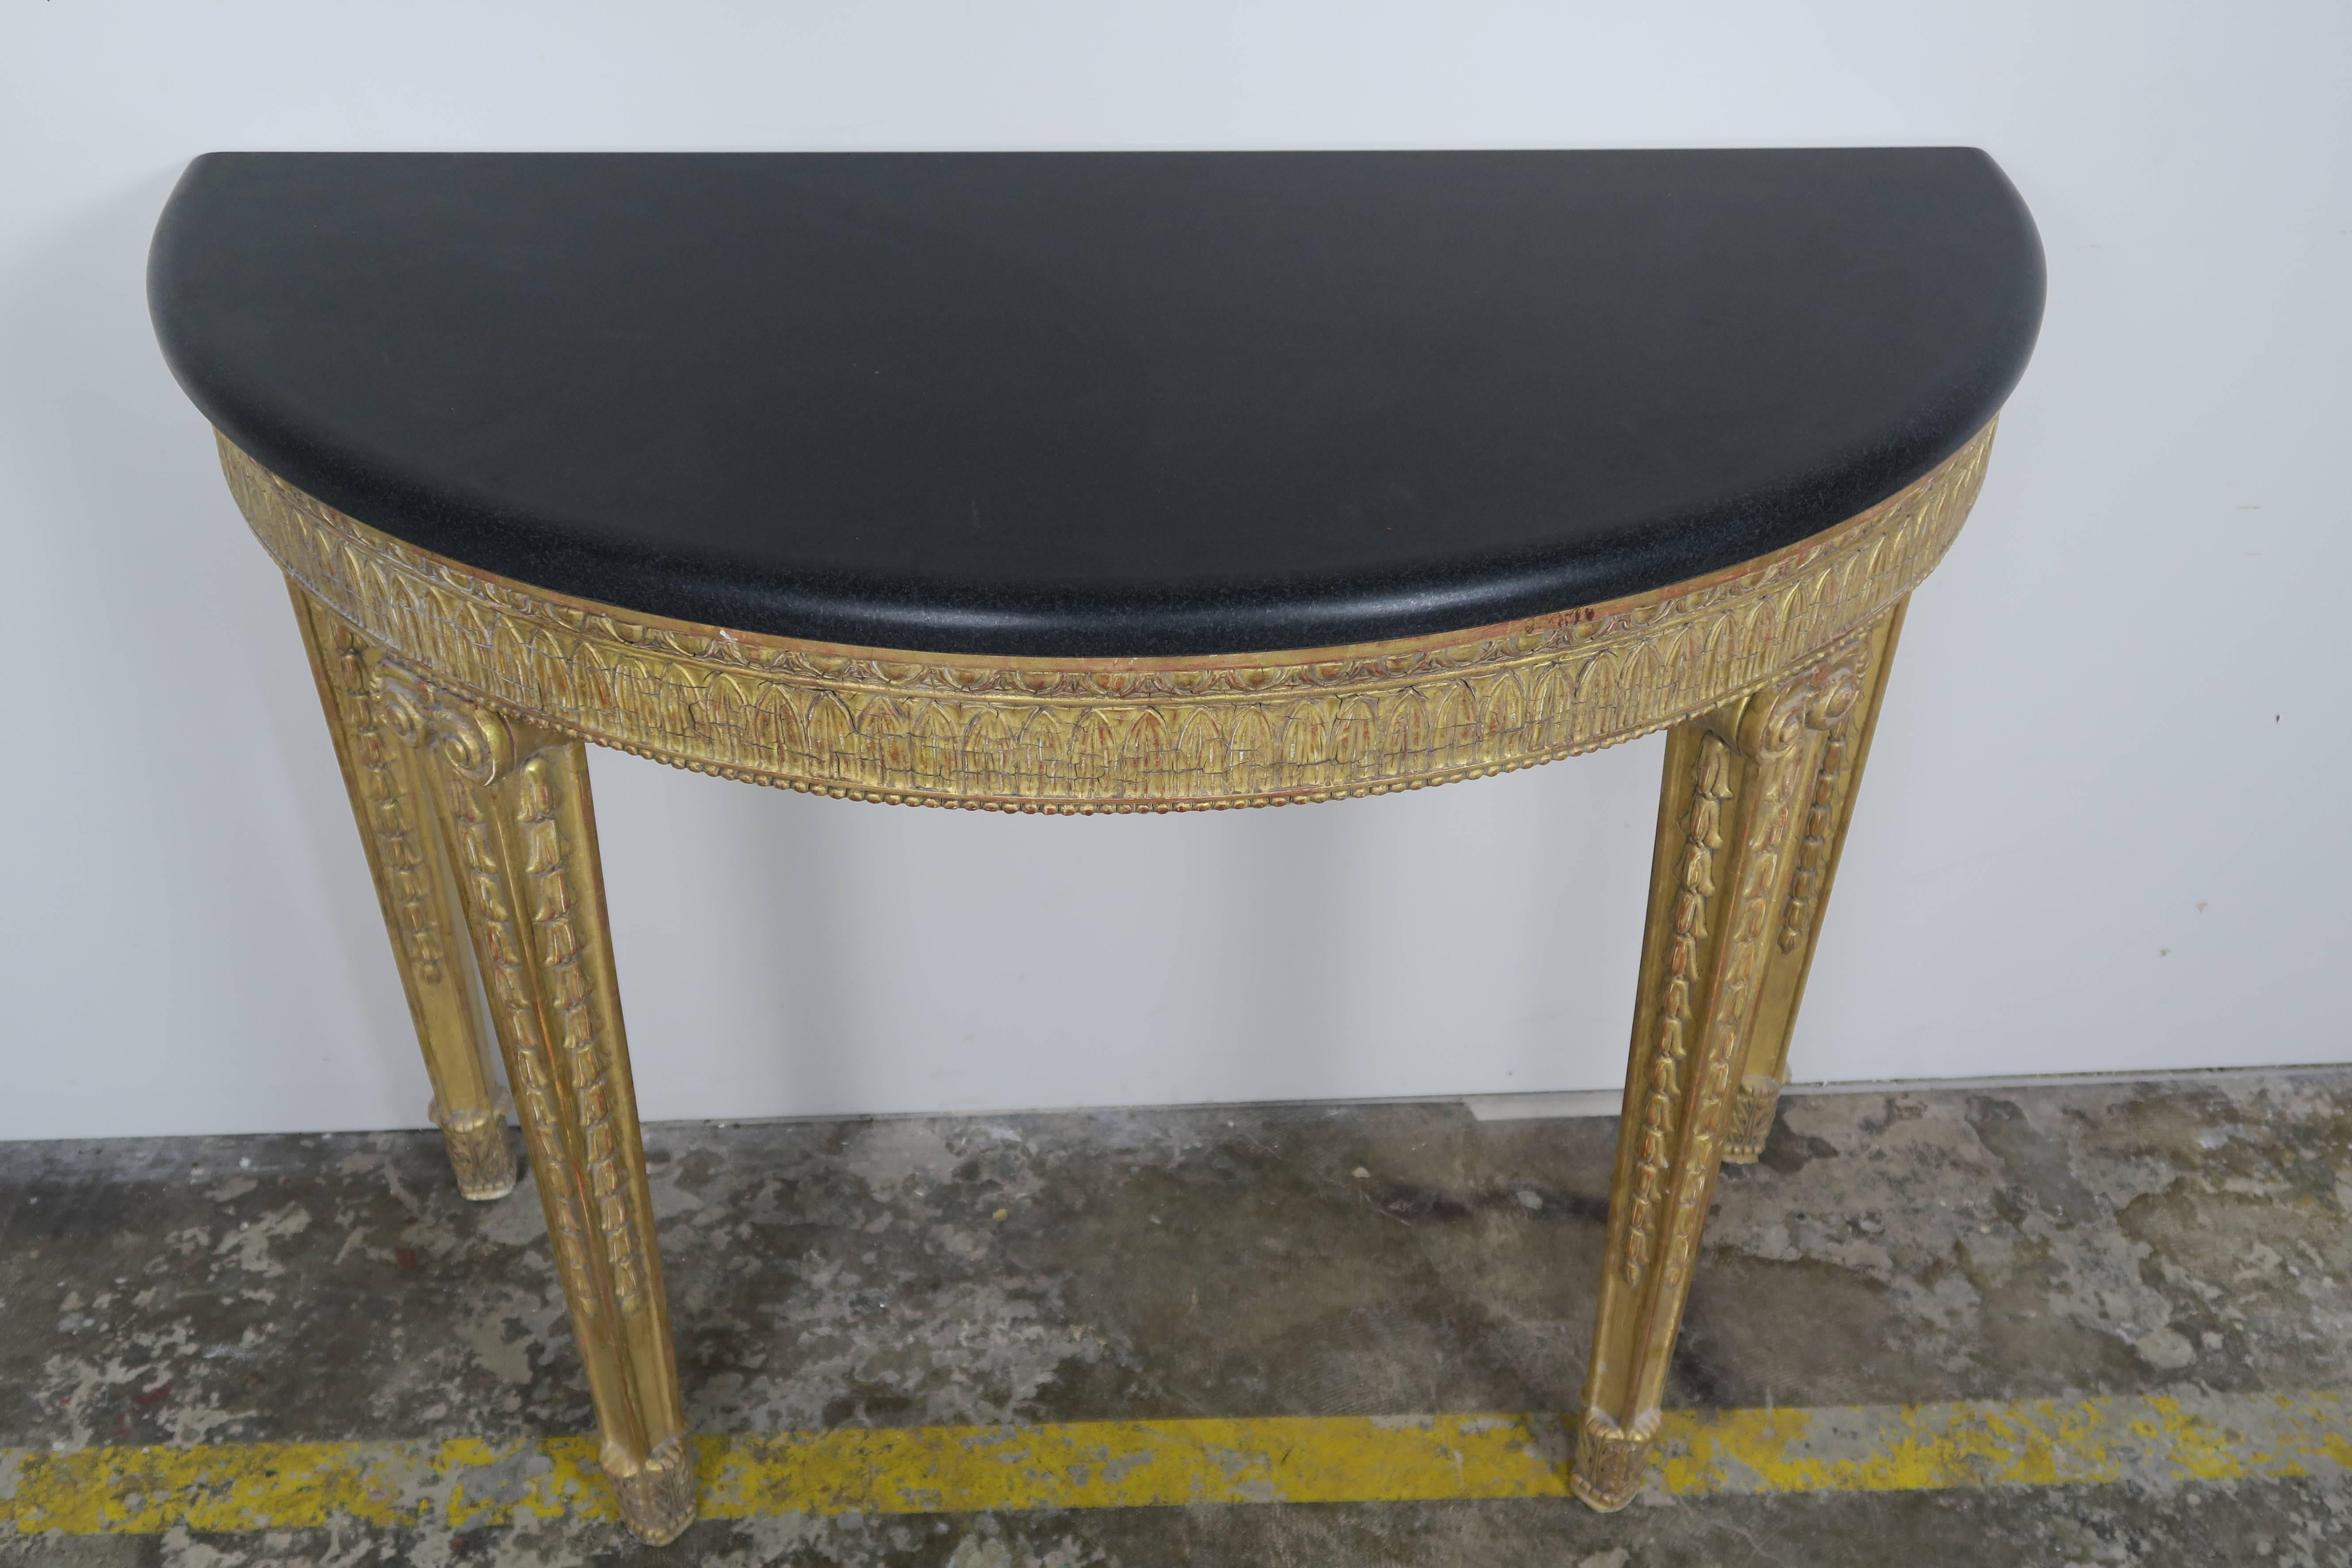 Wood Italian Neoclassical Style Giltwood Console with Stone Top